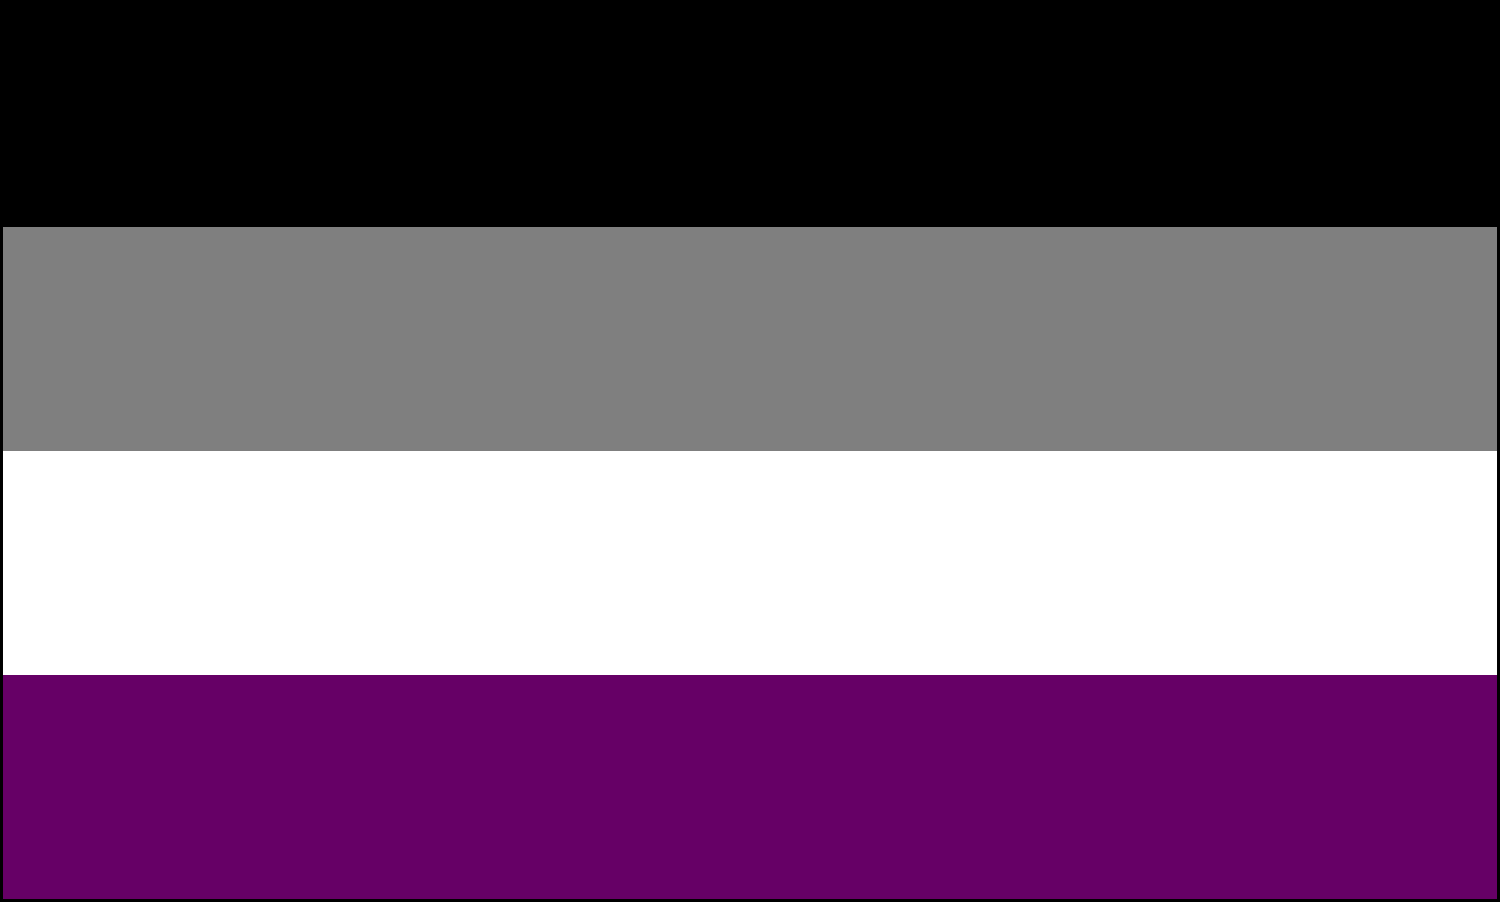 What Does The Demisexual Flag Look Like And What Does It Represent